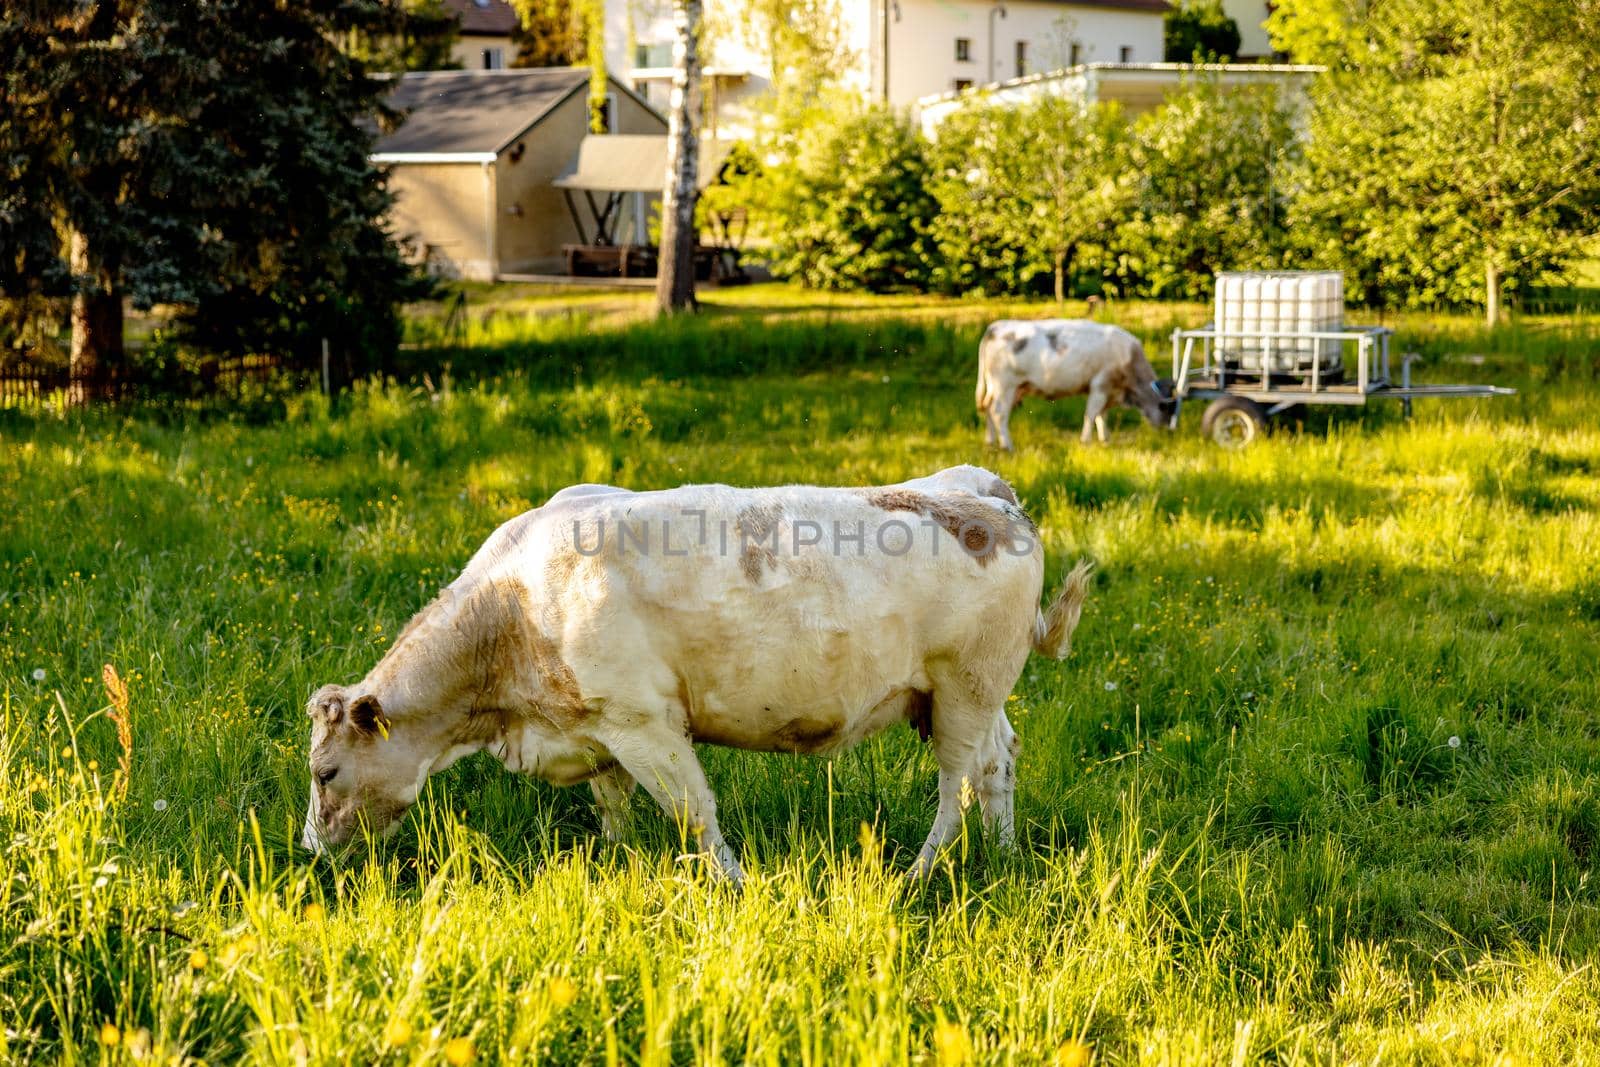 Cow on the meadow, eating grass. Farming outdoor. Beautiful landscape with sun light. Animal of farm. Sunny evening, amazing weather. Beauty of the nature, rural life